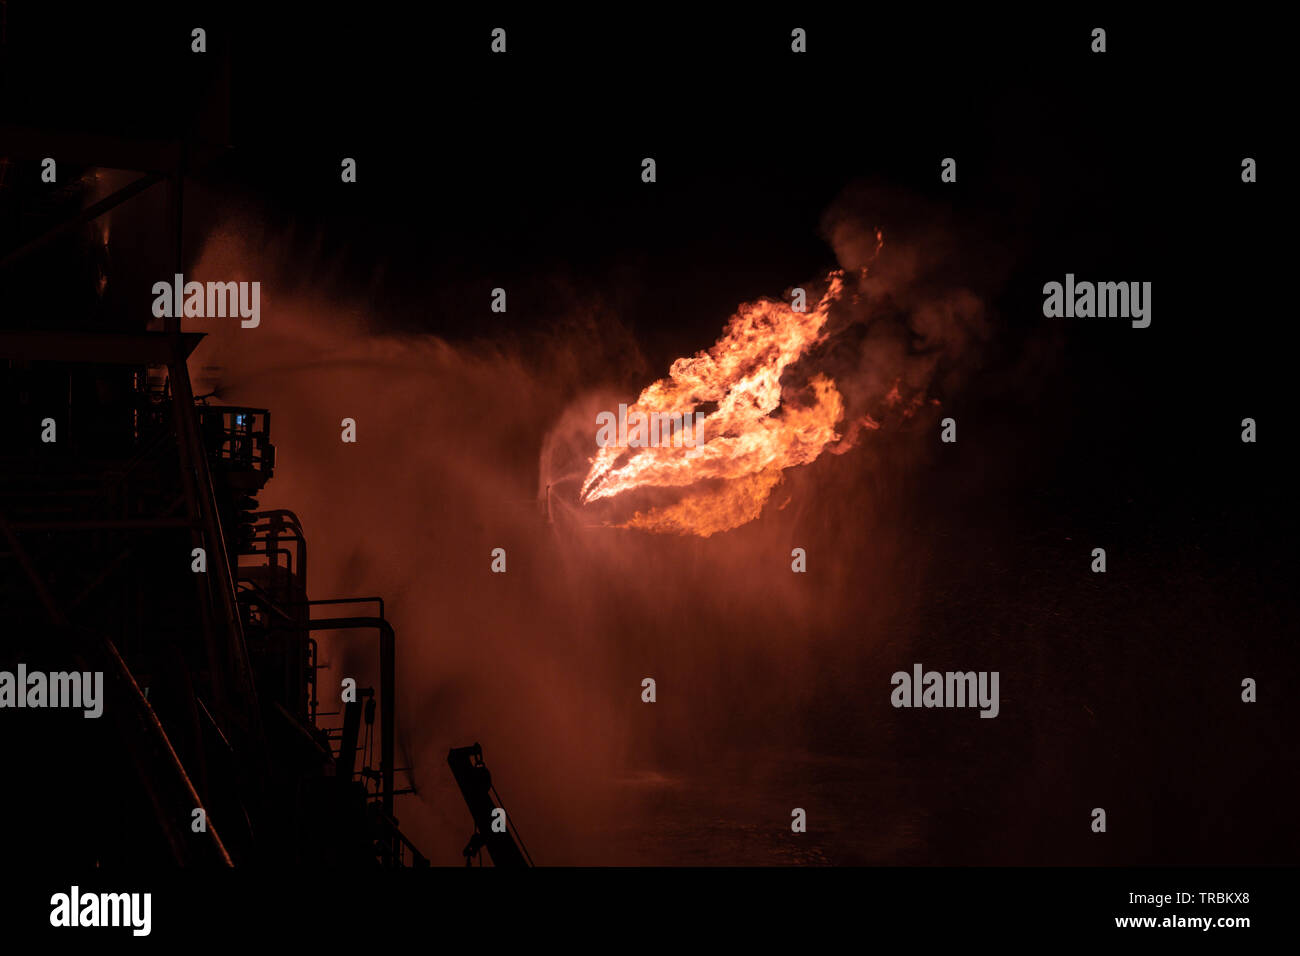 Well testing operation (flaring) of an oil and gas drilling rig. Burning huge gas flame controlled by the deluge system Stock Photo